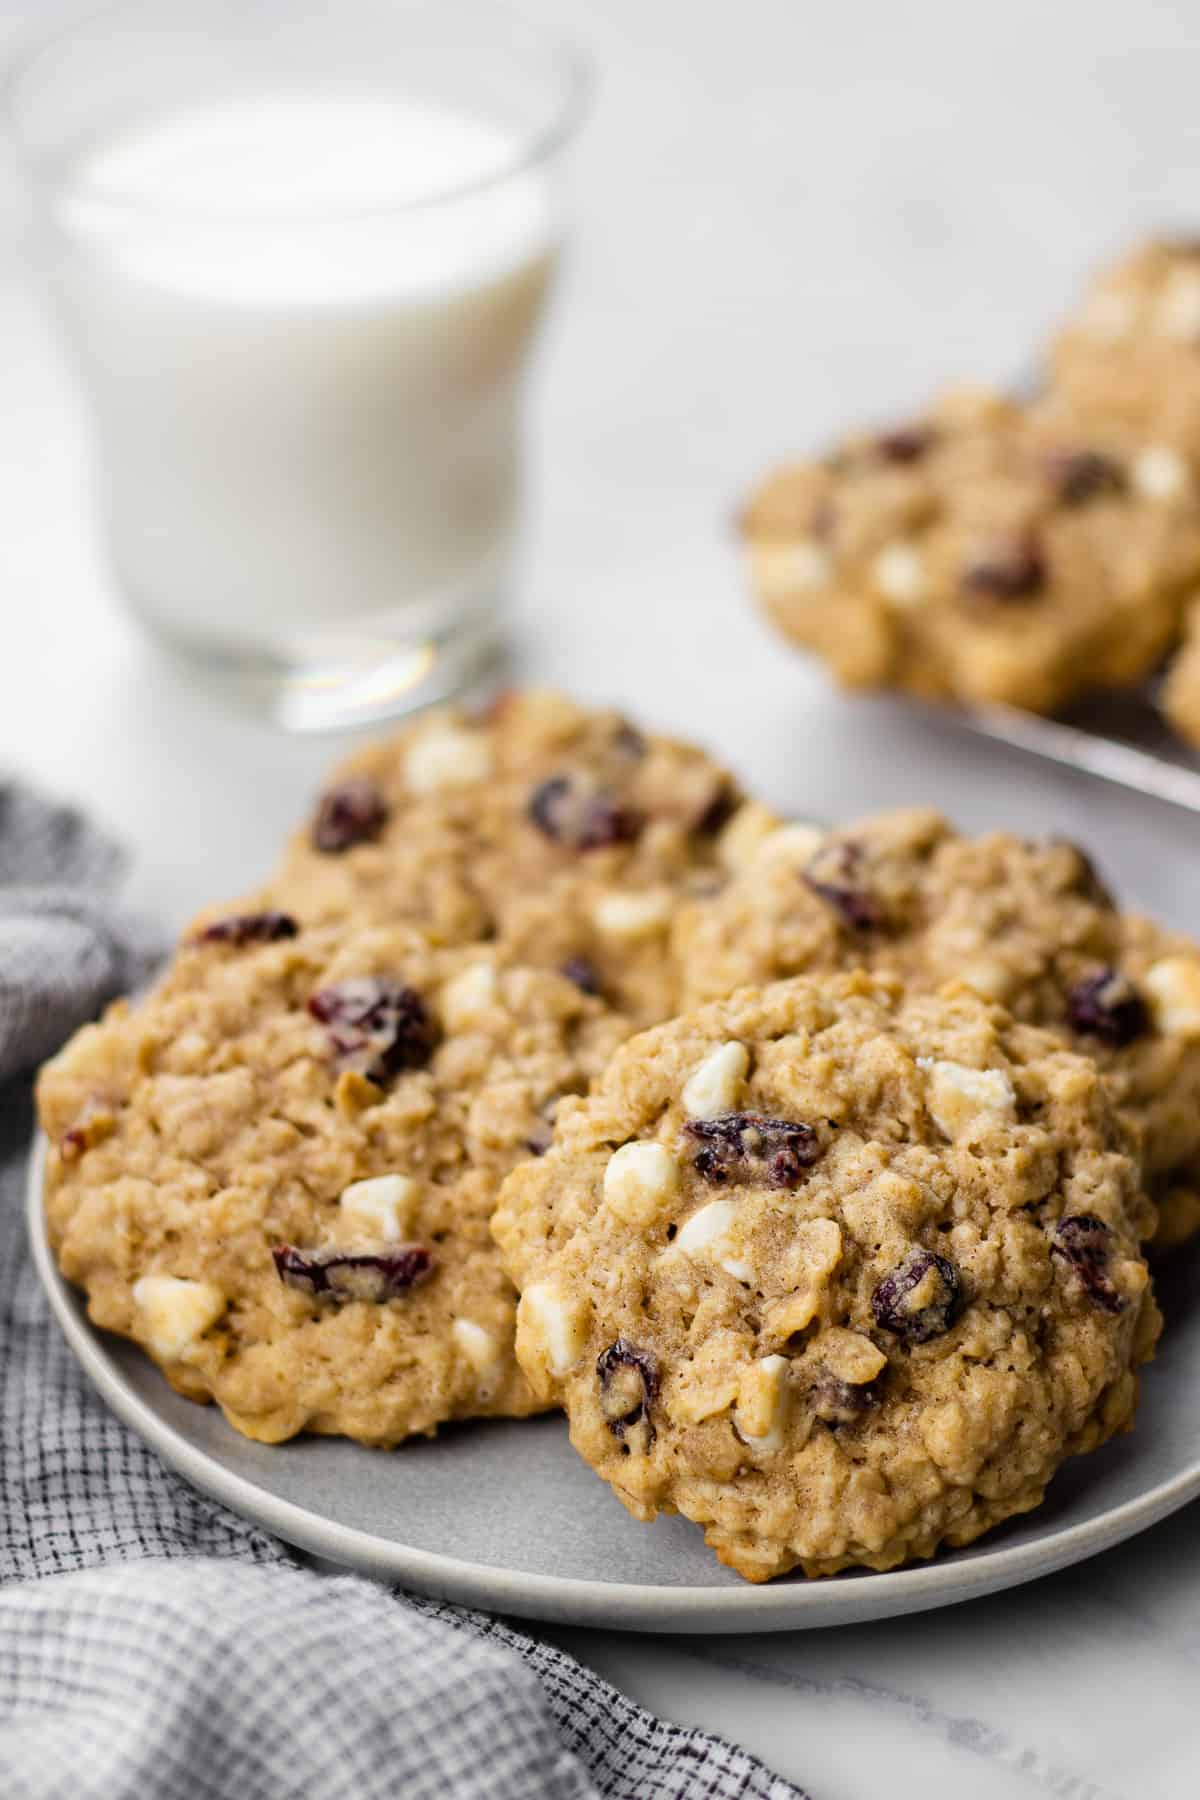 Oatmeal cookies on a plate.